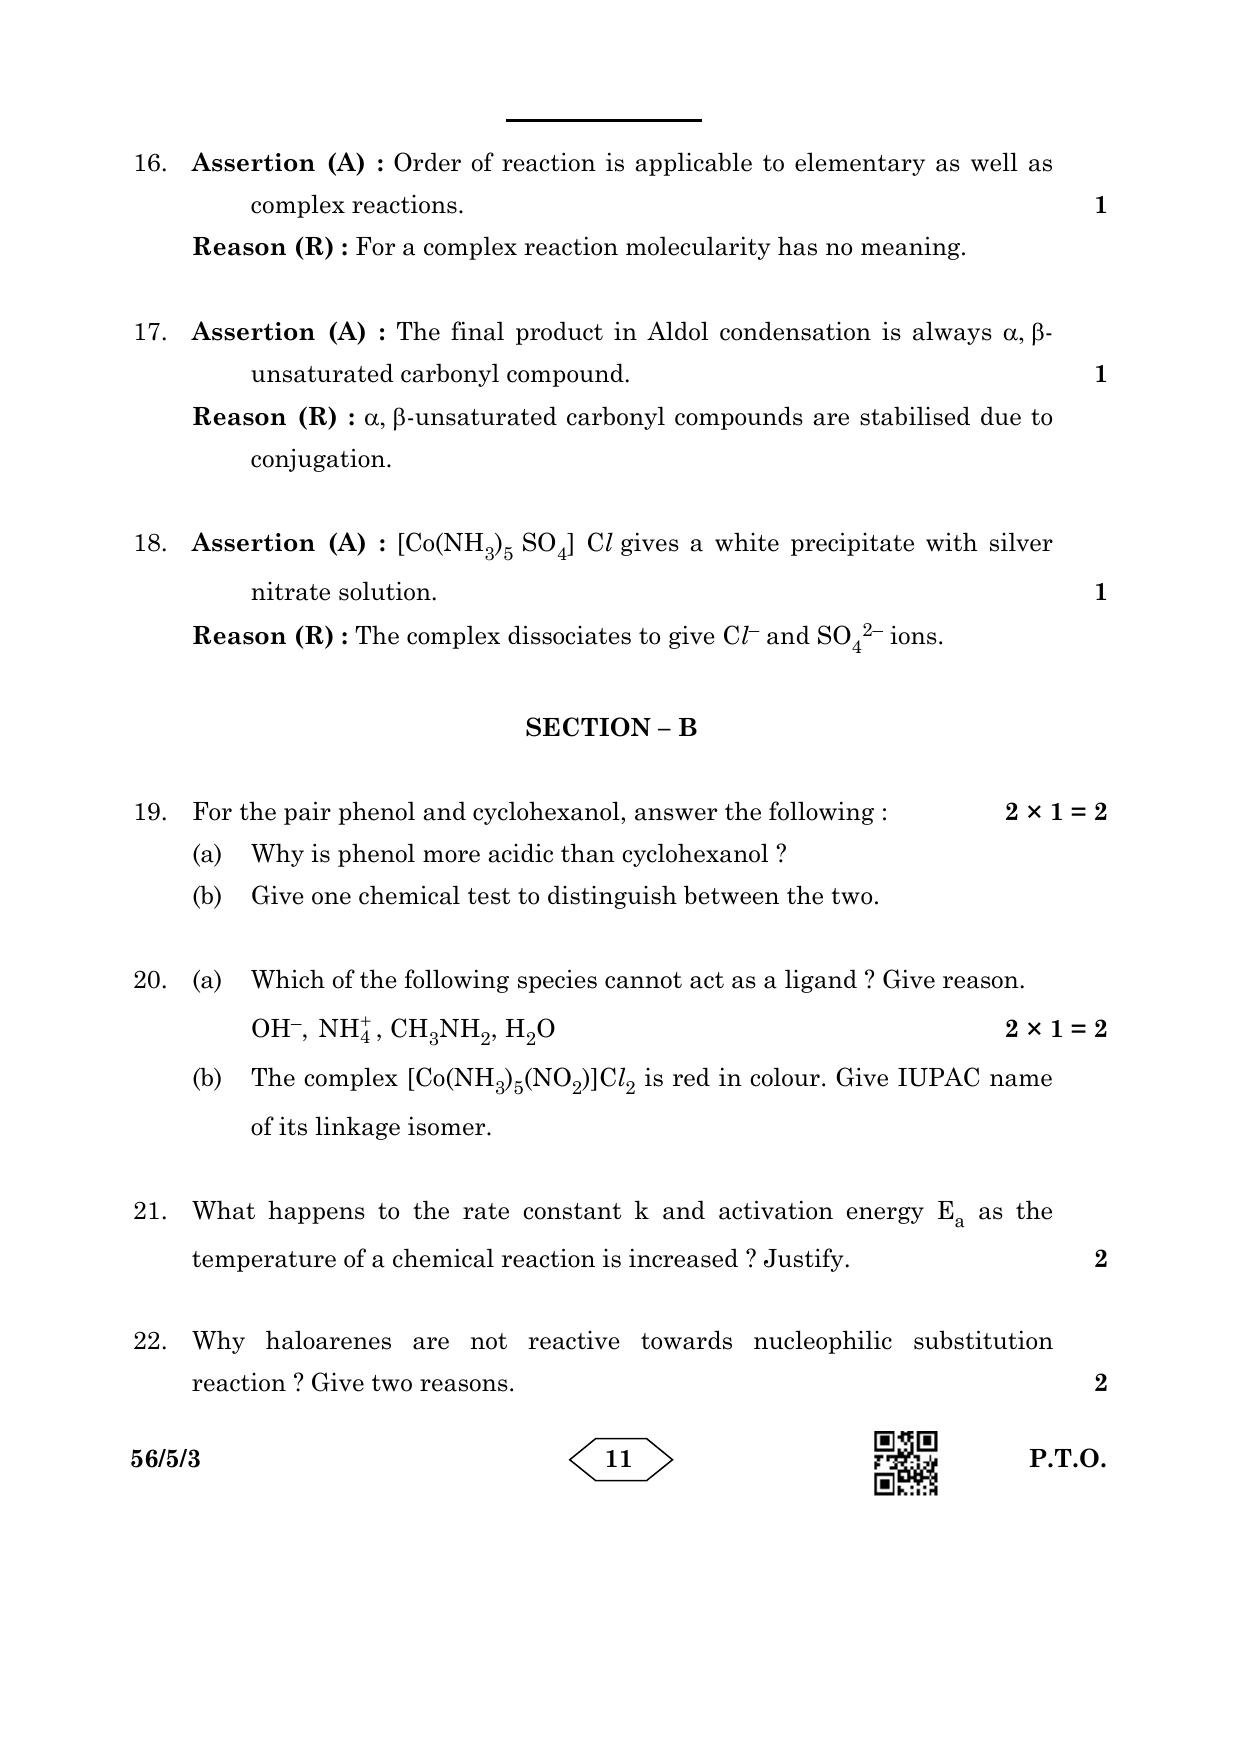 CBSE Class 12 56-5-3 Chemistry 2023 Question Paper - Page 11